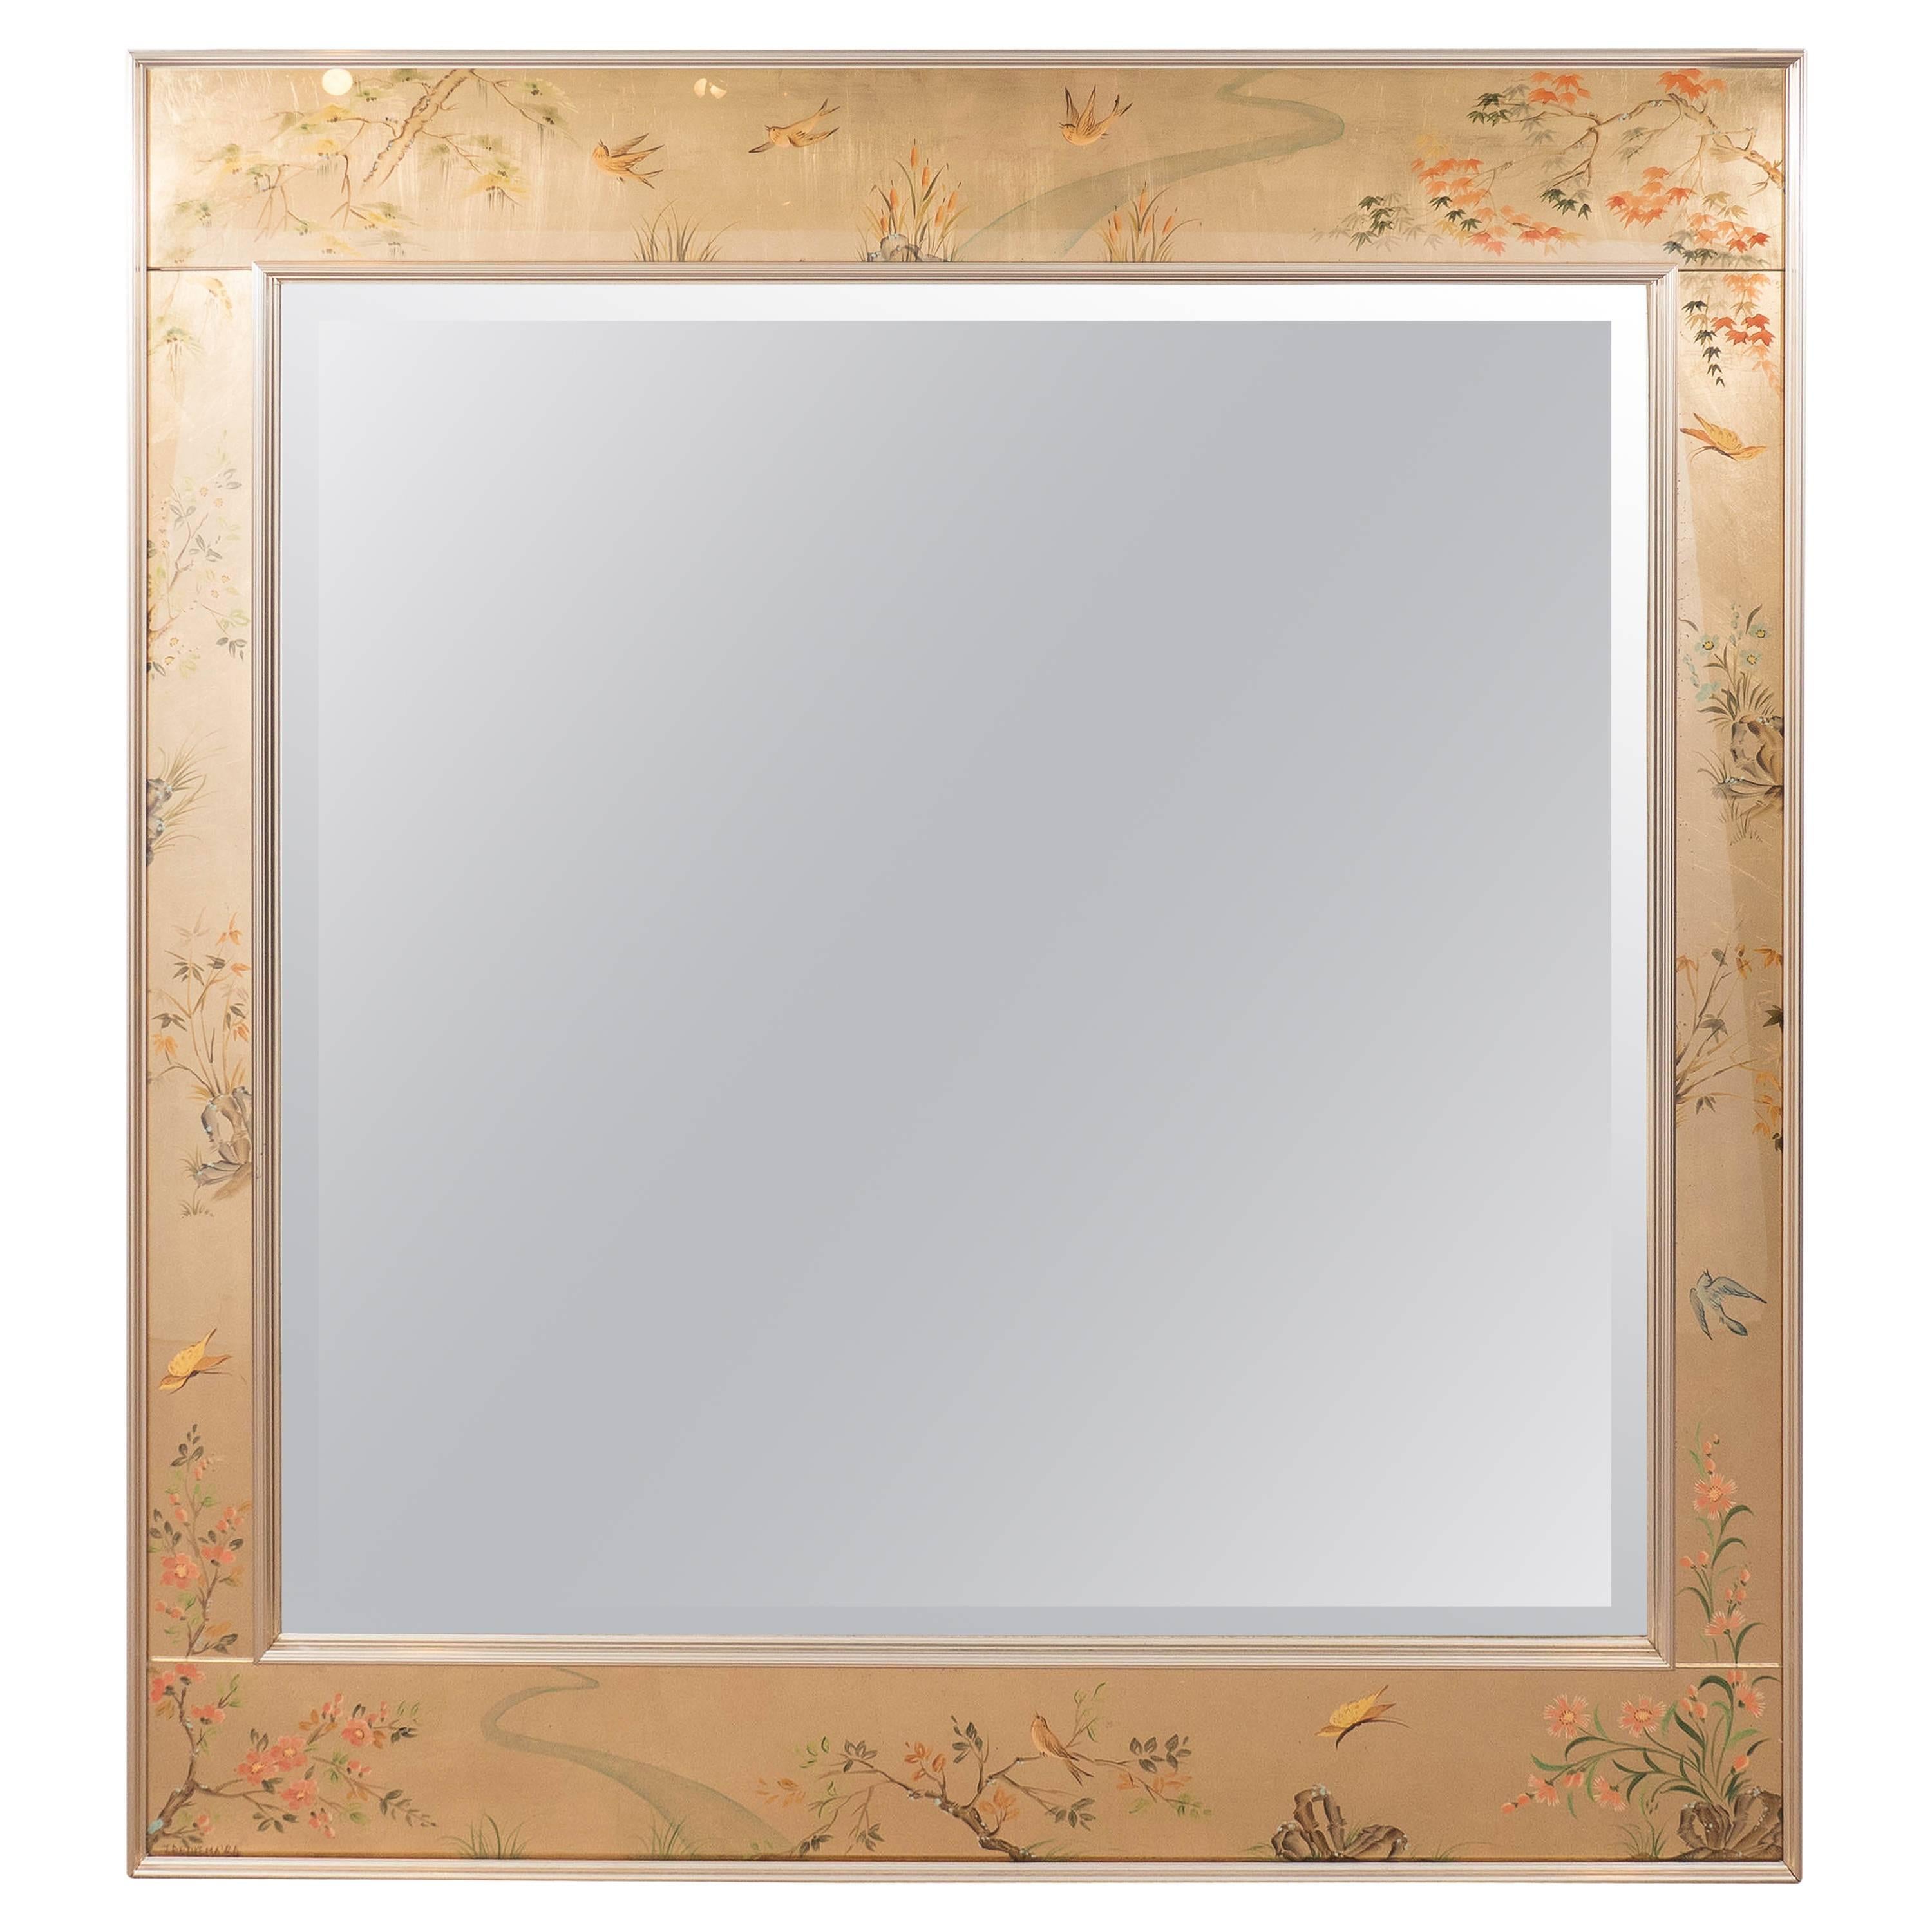 A Midcentury LaBarge Chinoiserie Hand-painted Eglomise Beveled Mirror